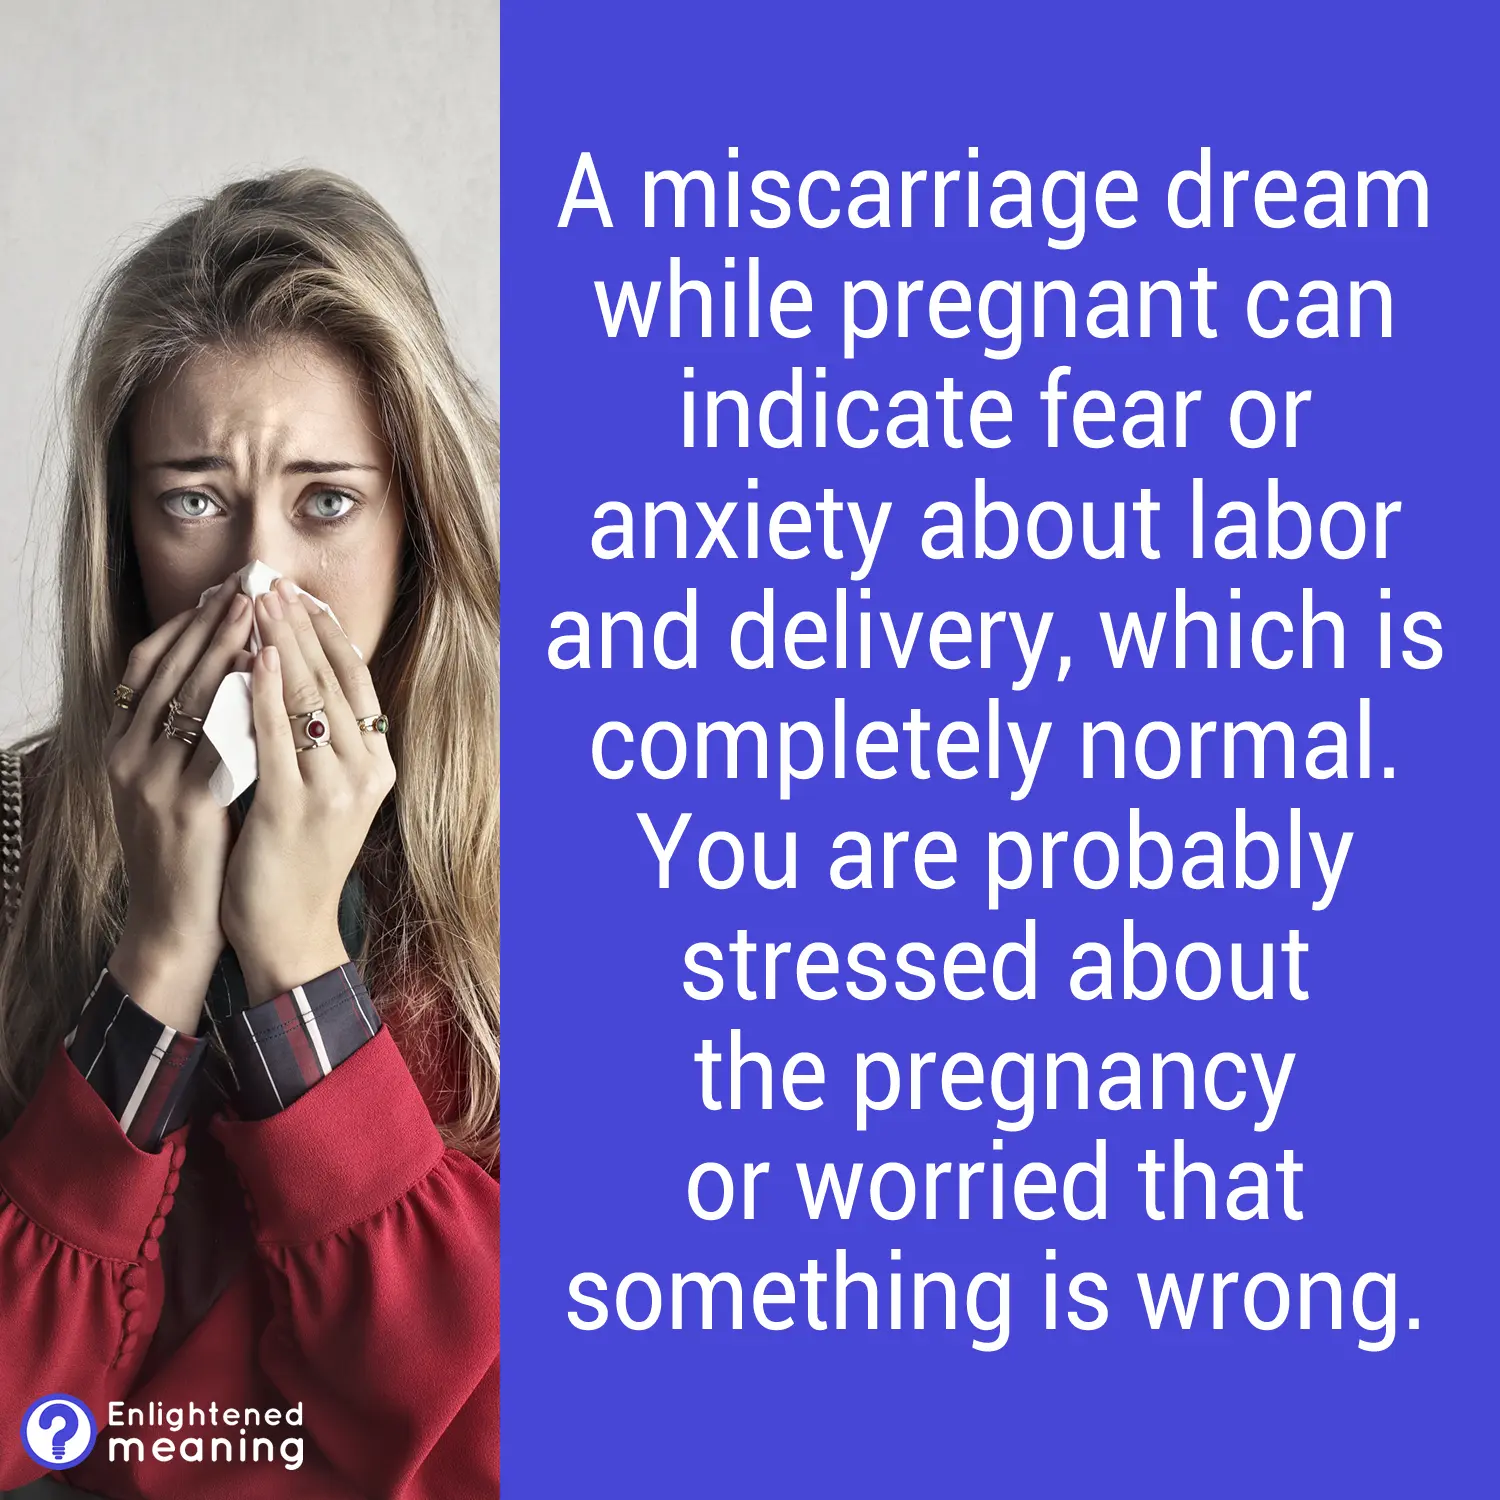 Spiritual Meaning of Miscarriage in a Dream While Pregnant